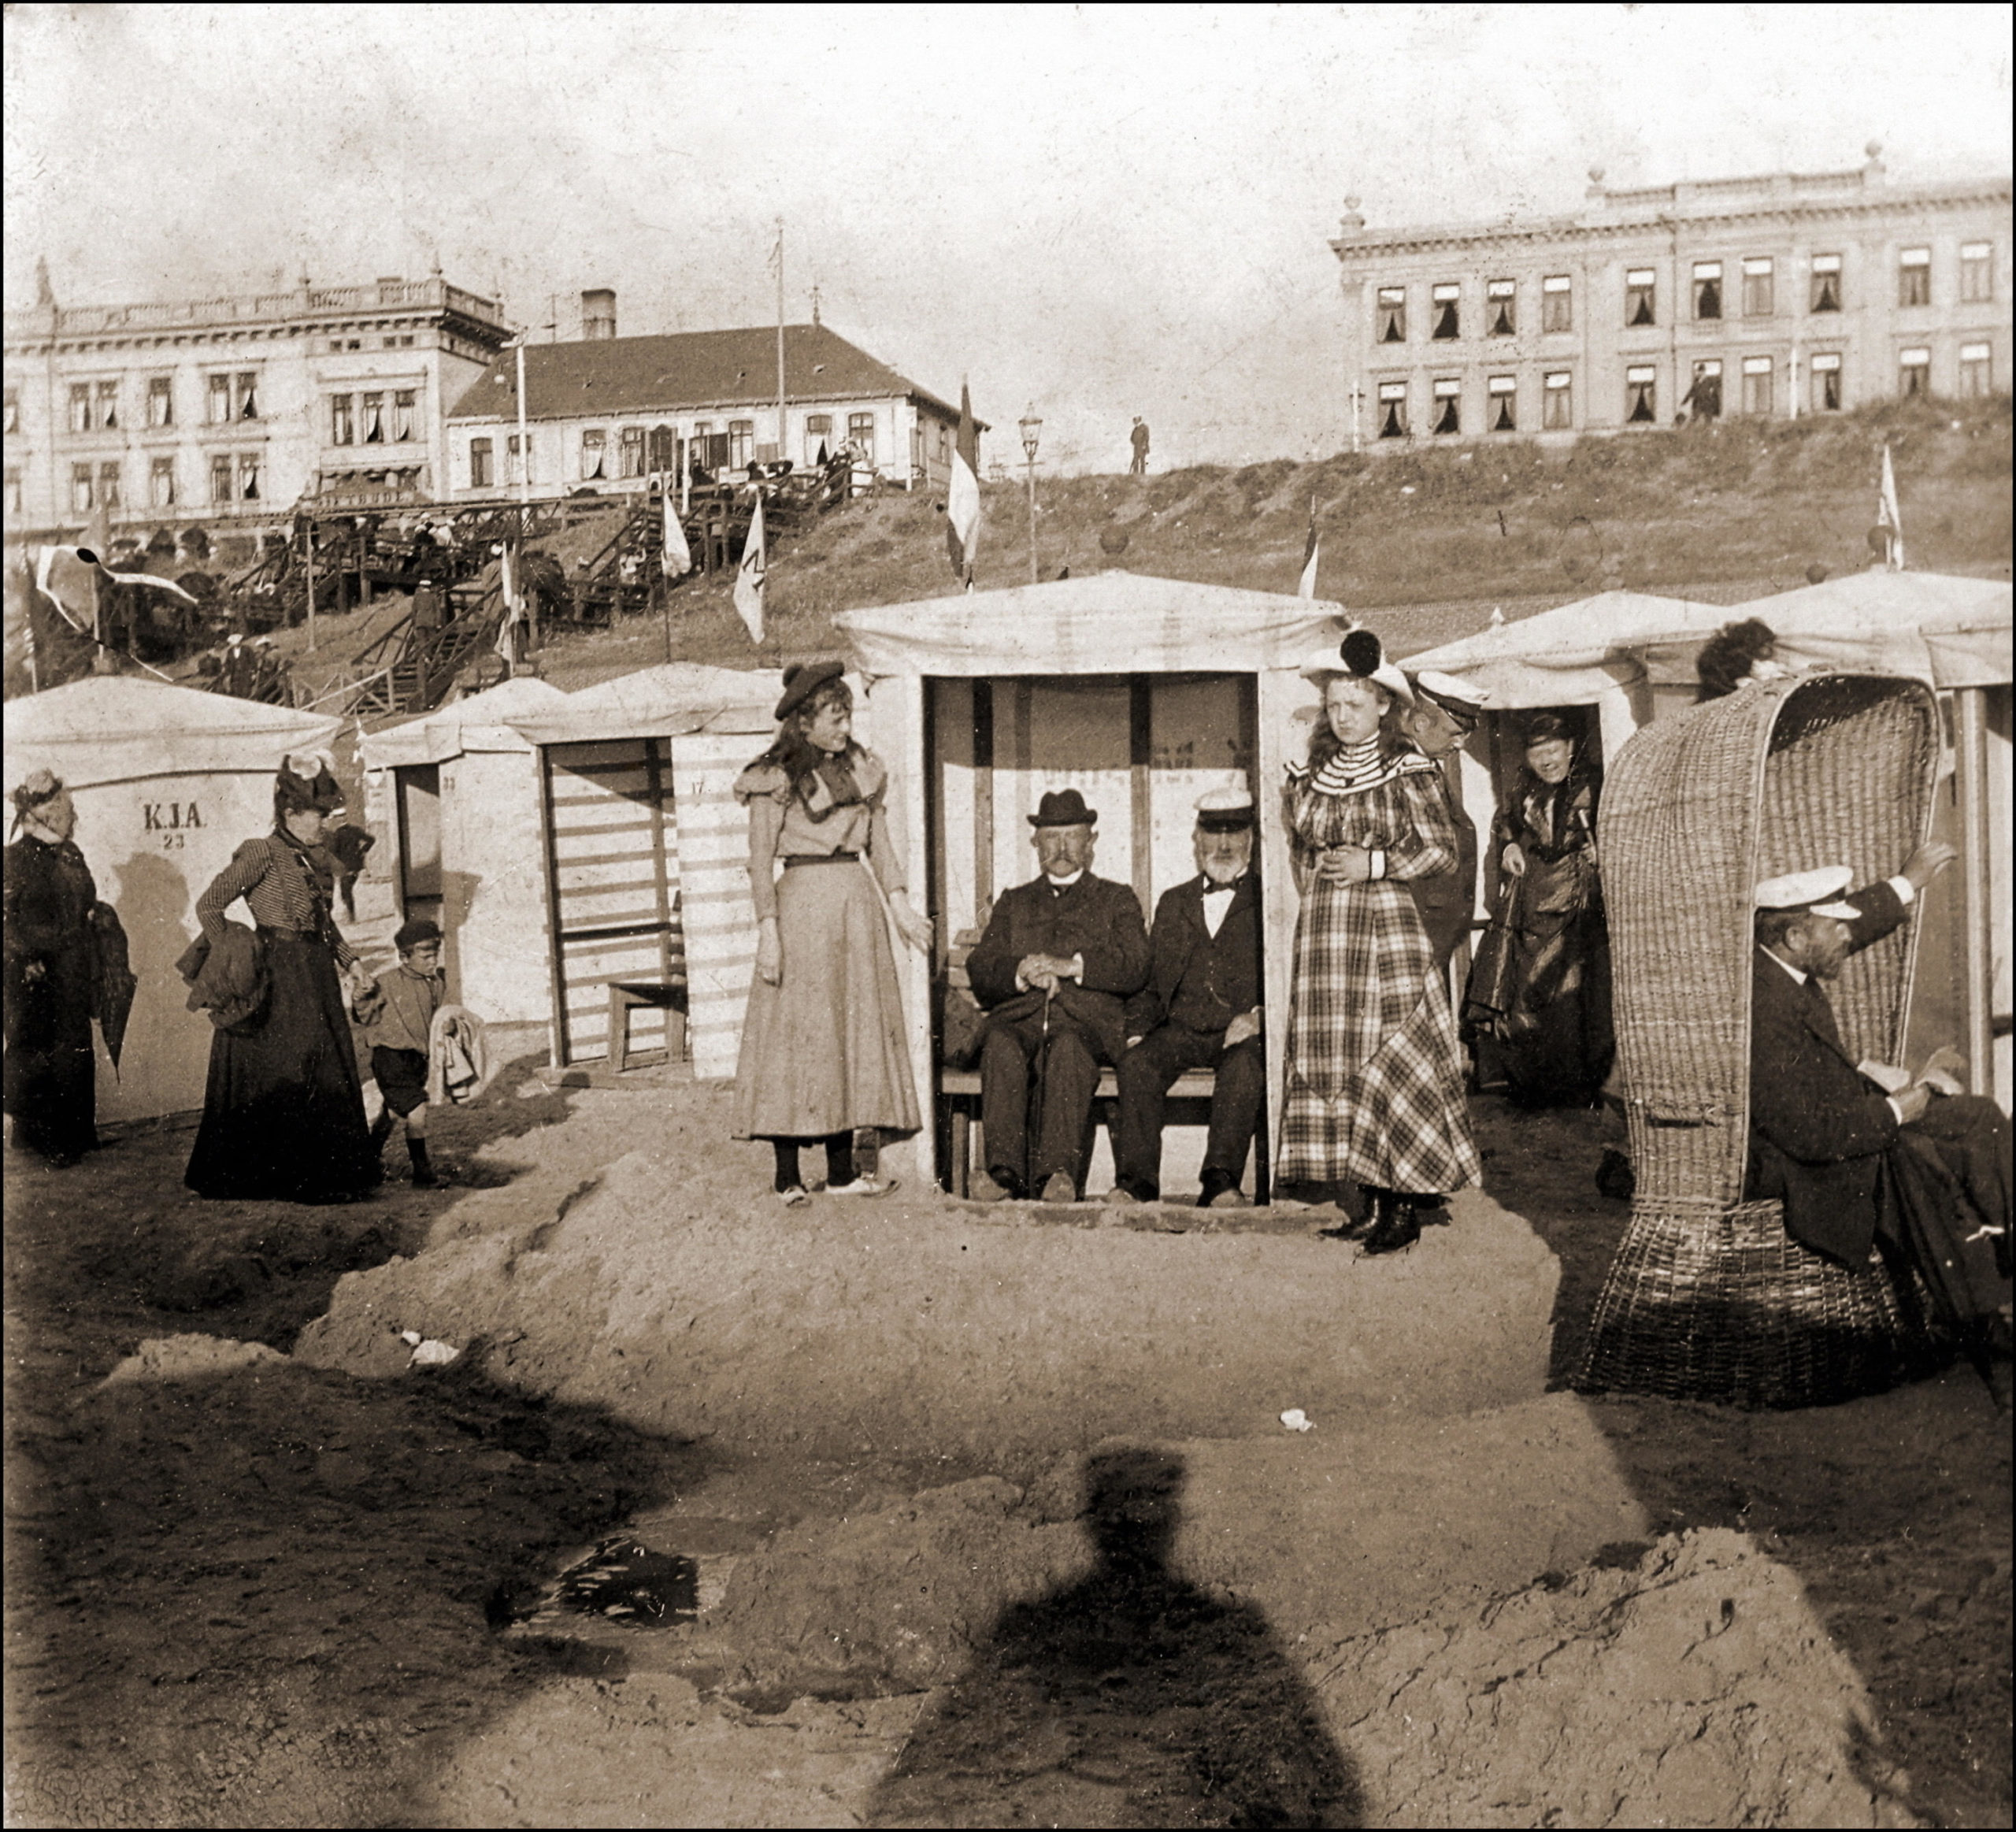 vintage photo of a group of people sitting in beach cabanas